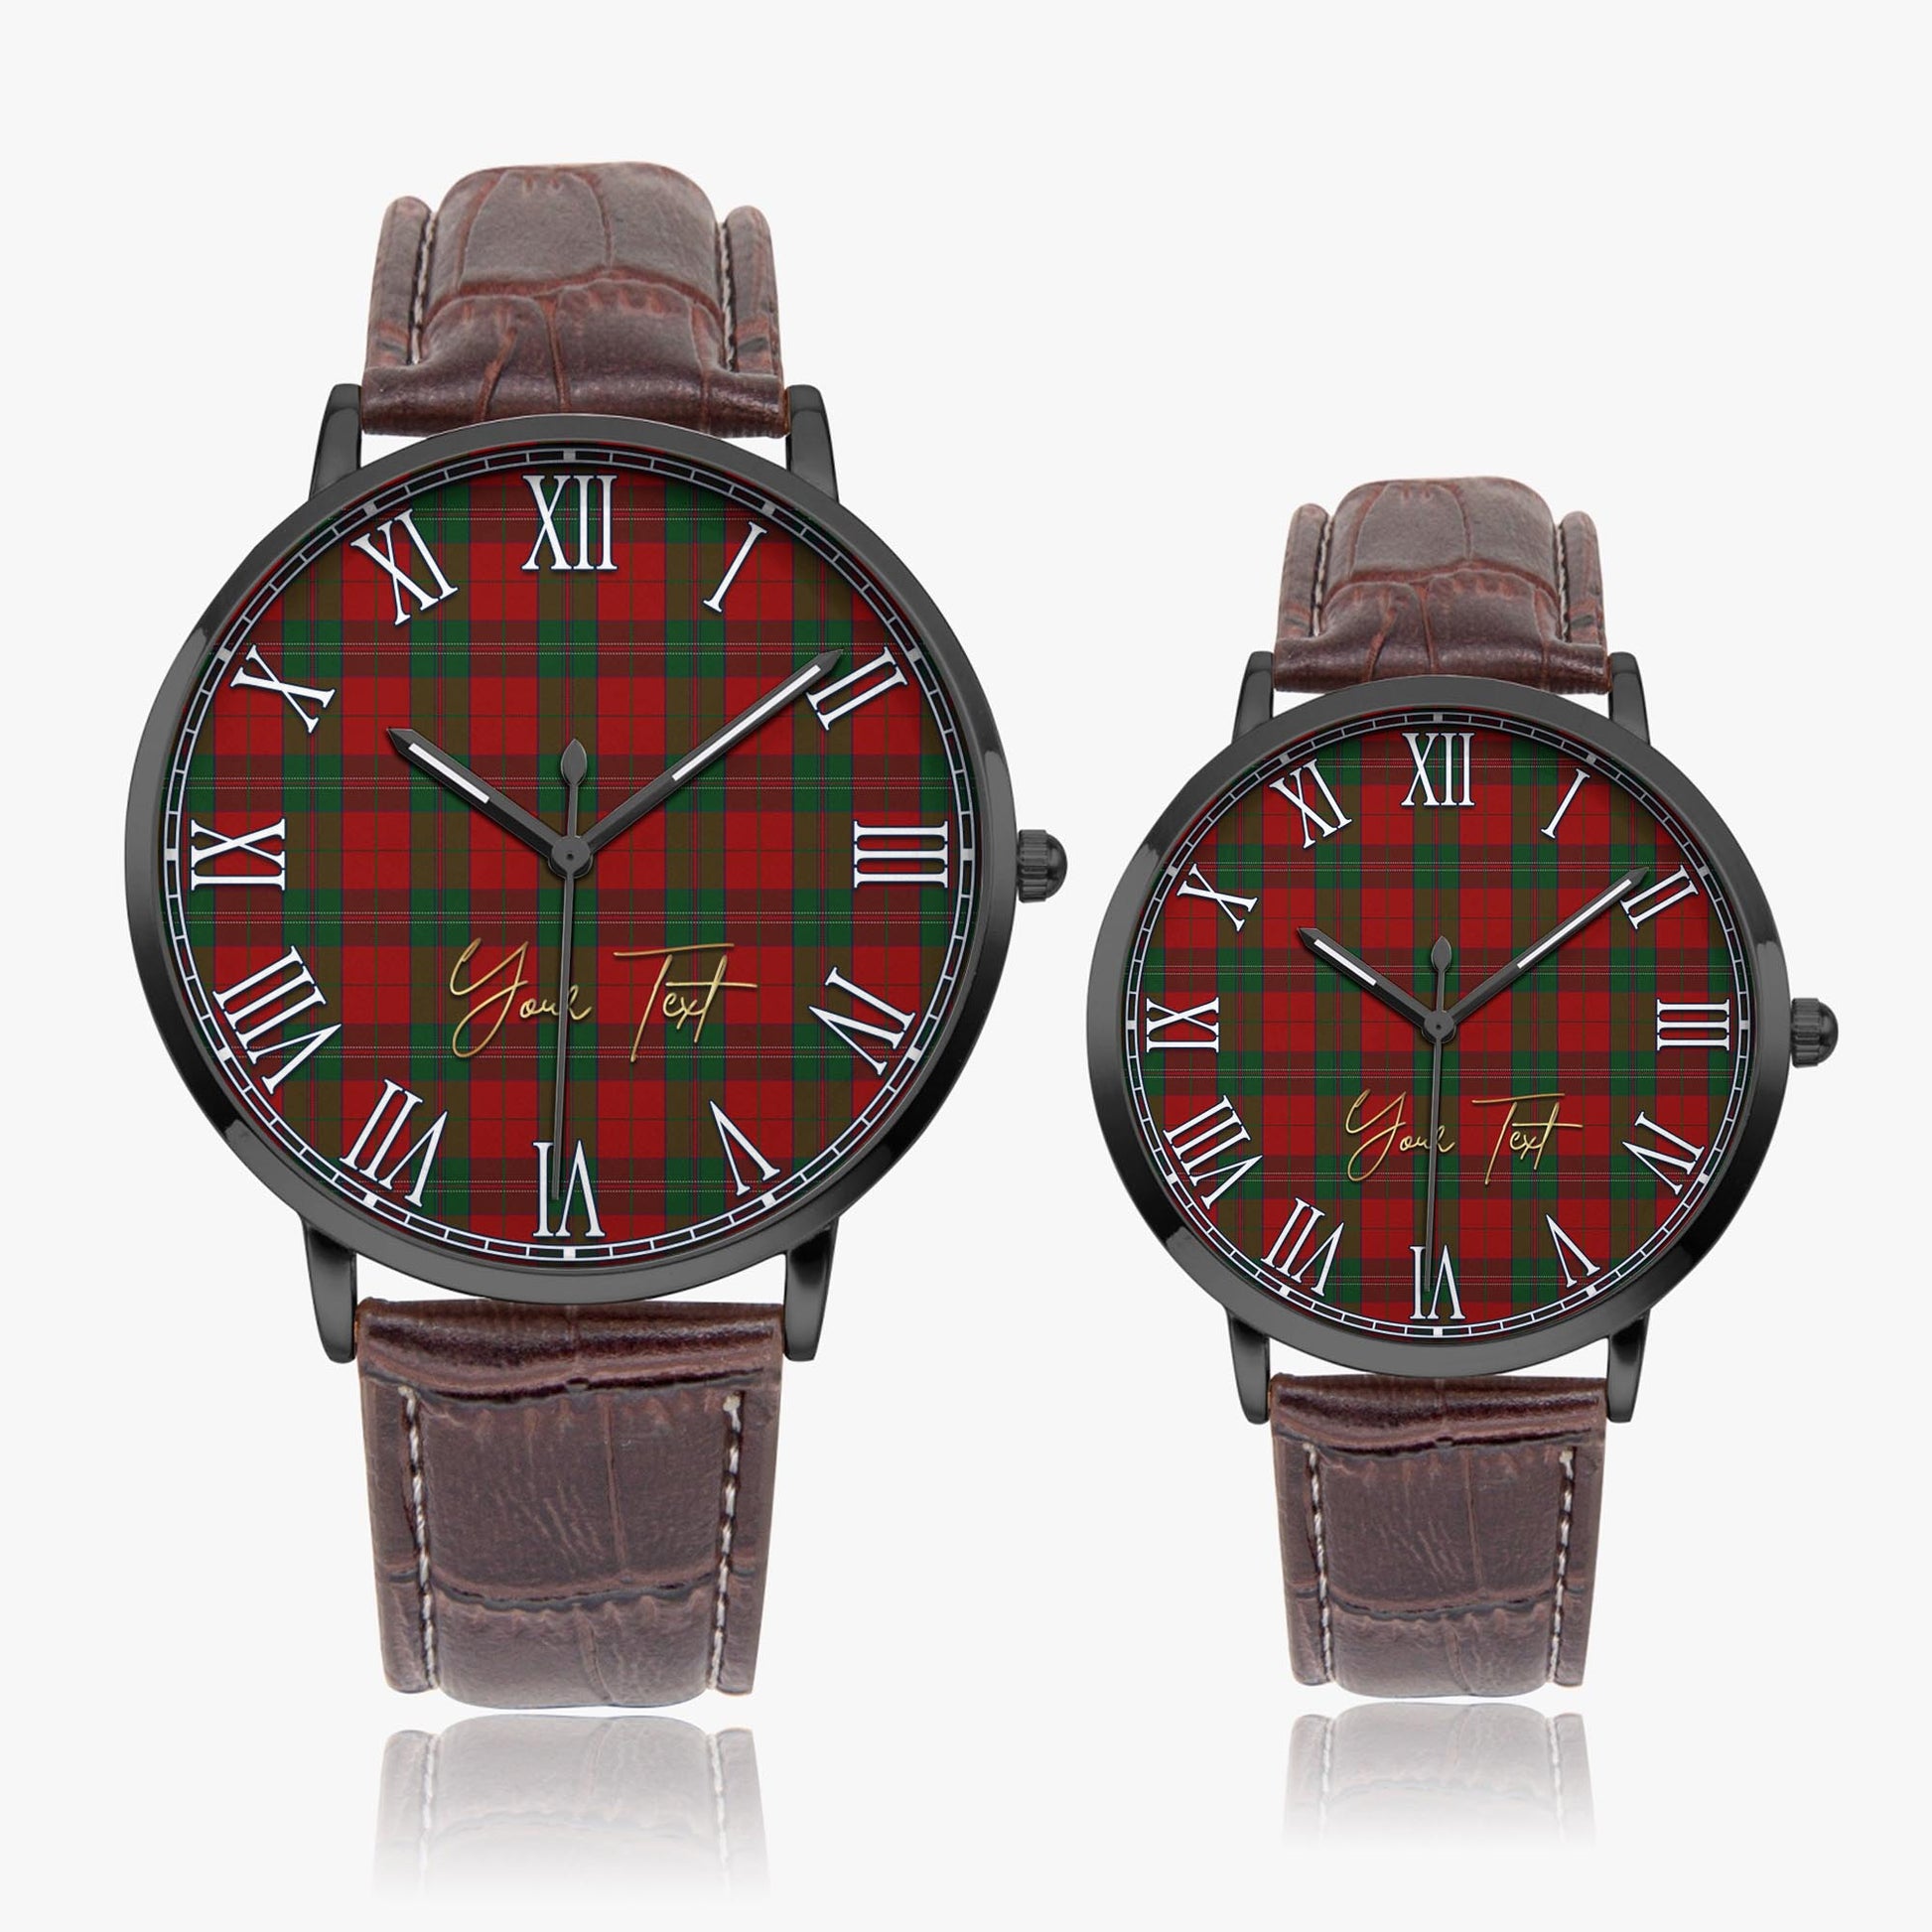 Thomas of Wales Tartan Personalized Your Text Leather Trap Quartz Watch Ultra Thin Black Case With Brown Leather Strap - Tartanvibesclothing Shop